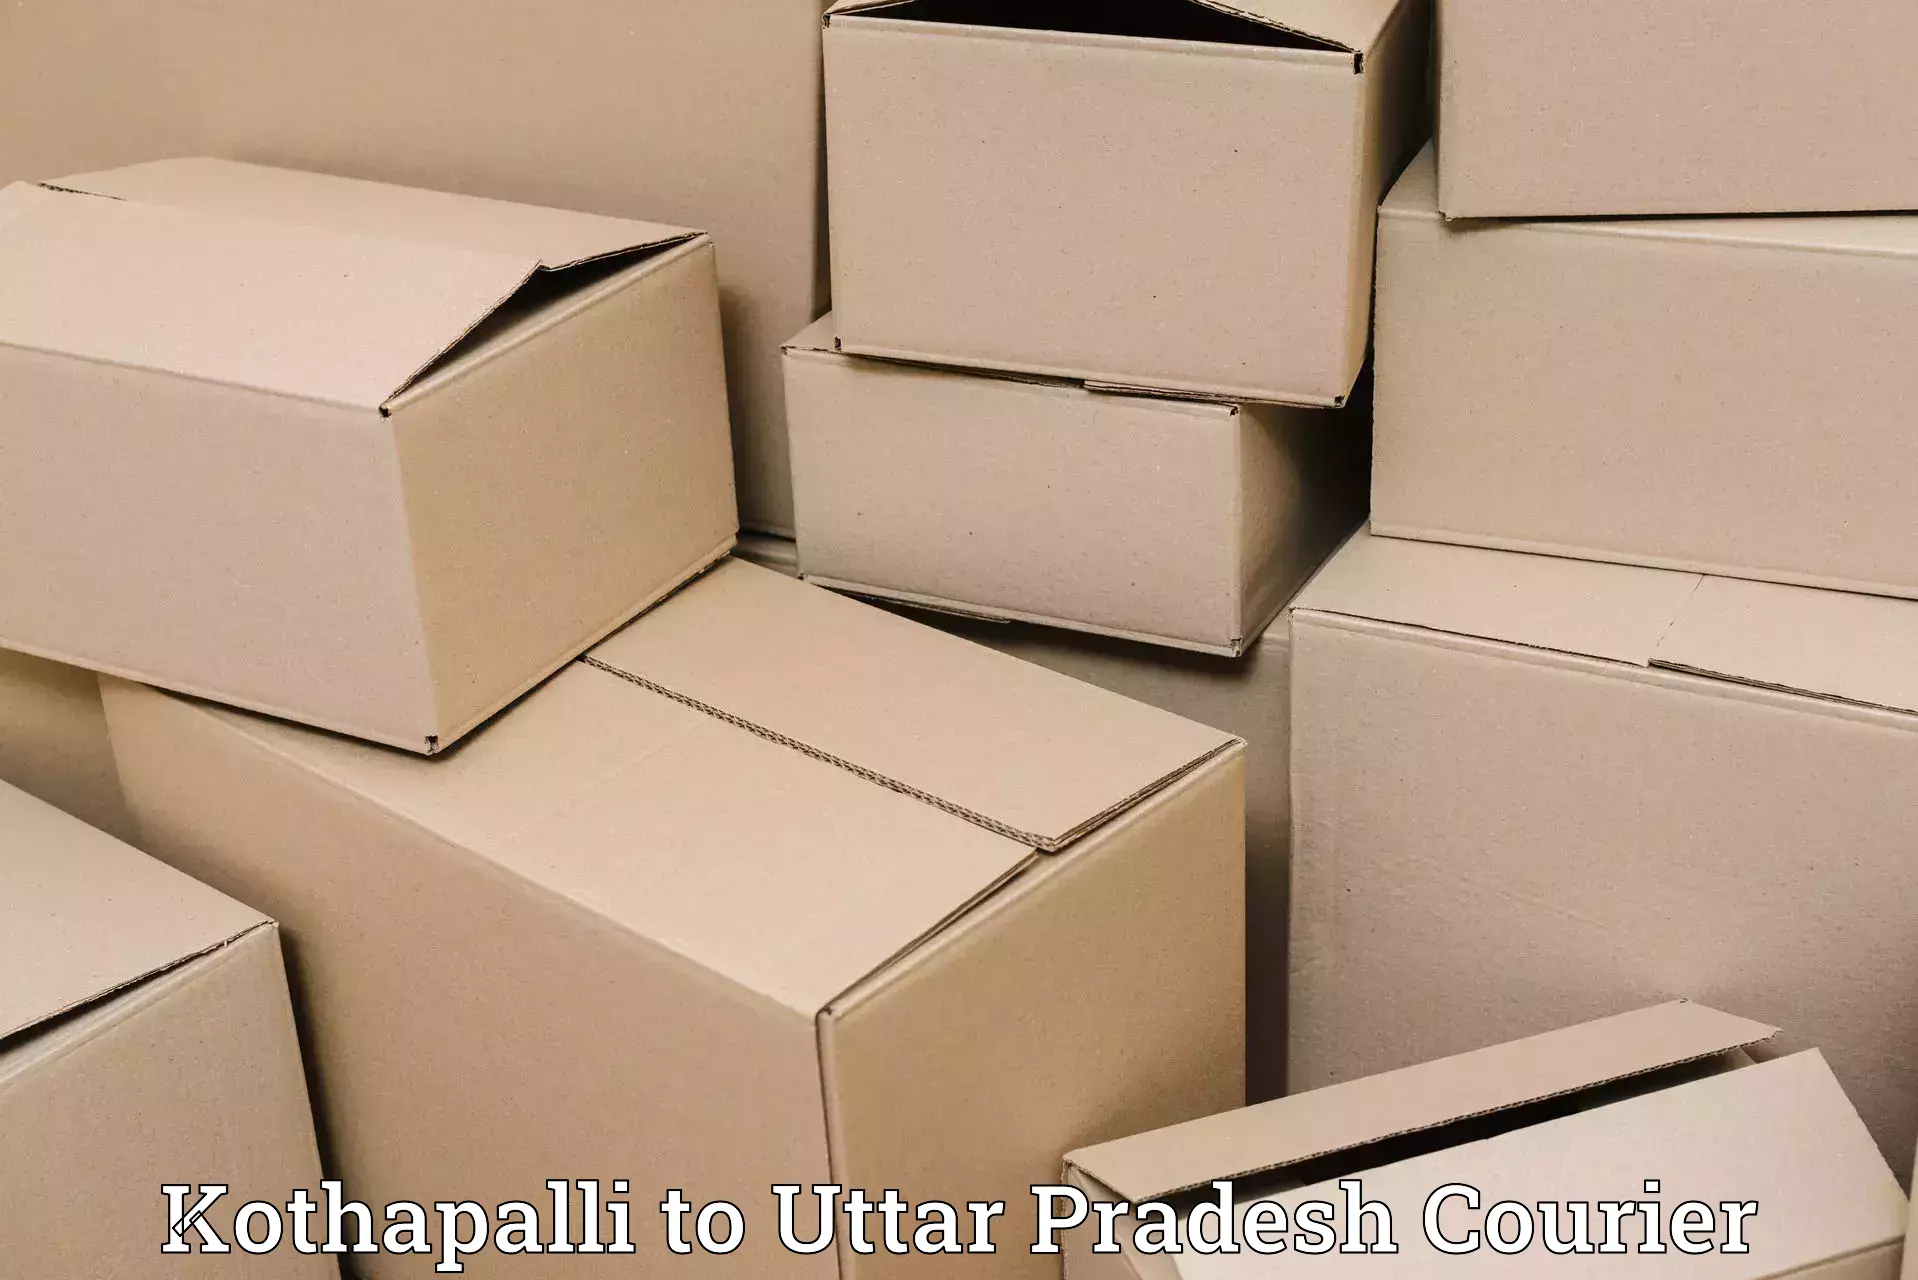 Fragile item shipping in Kothapalli to Allahabad